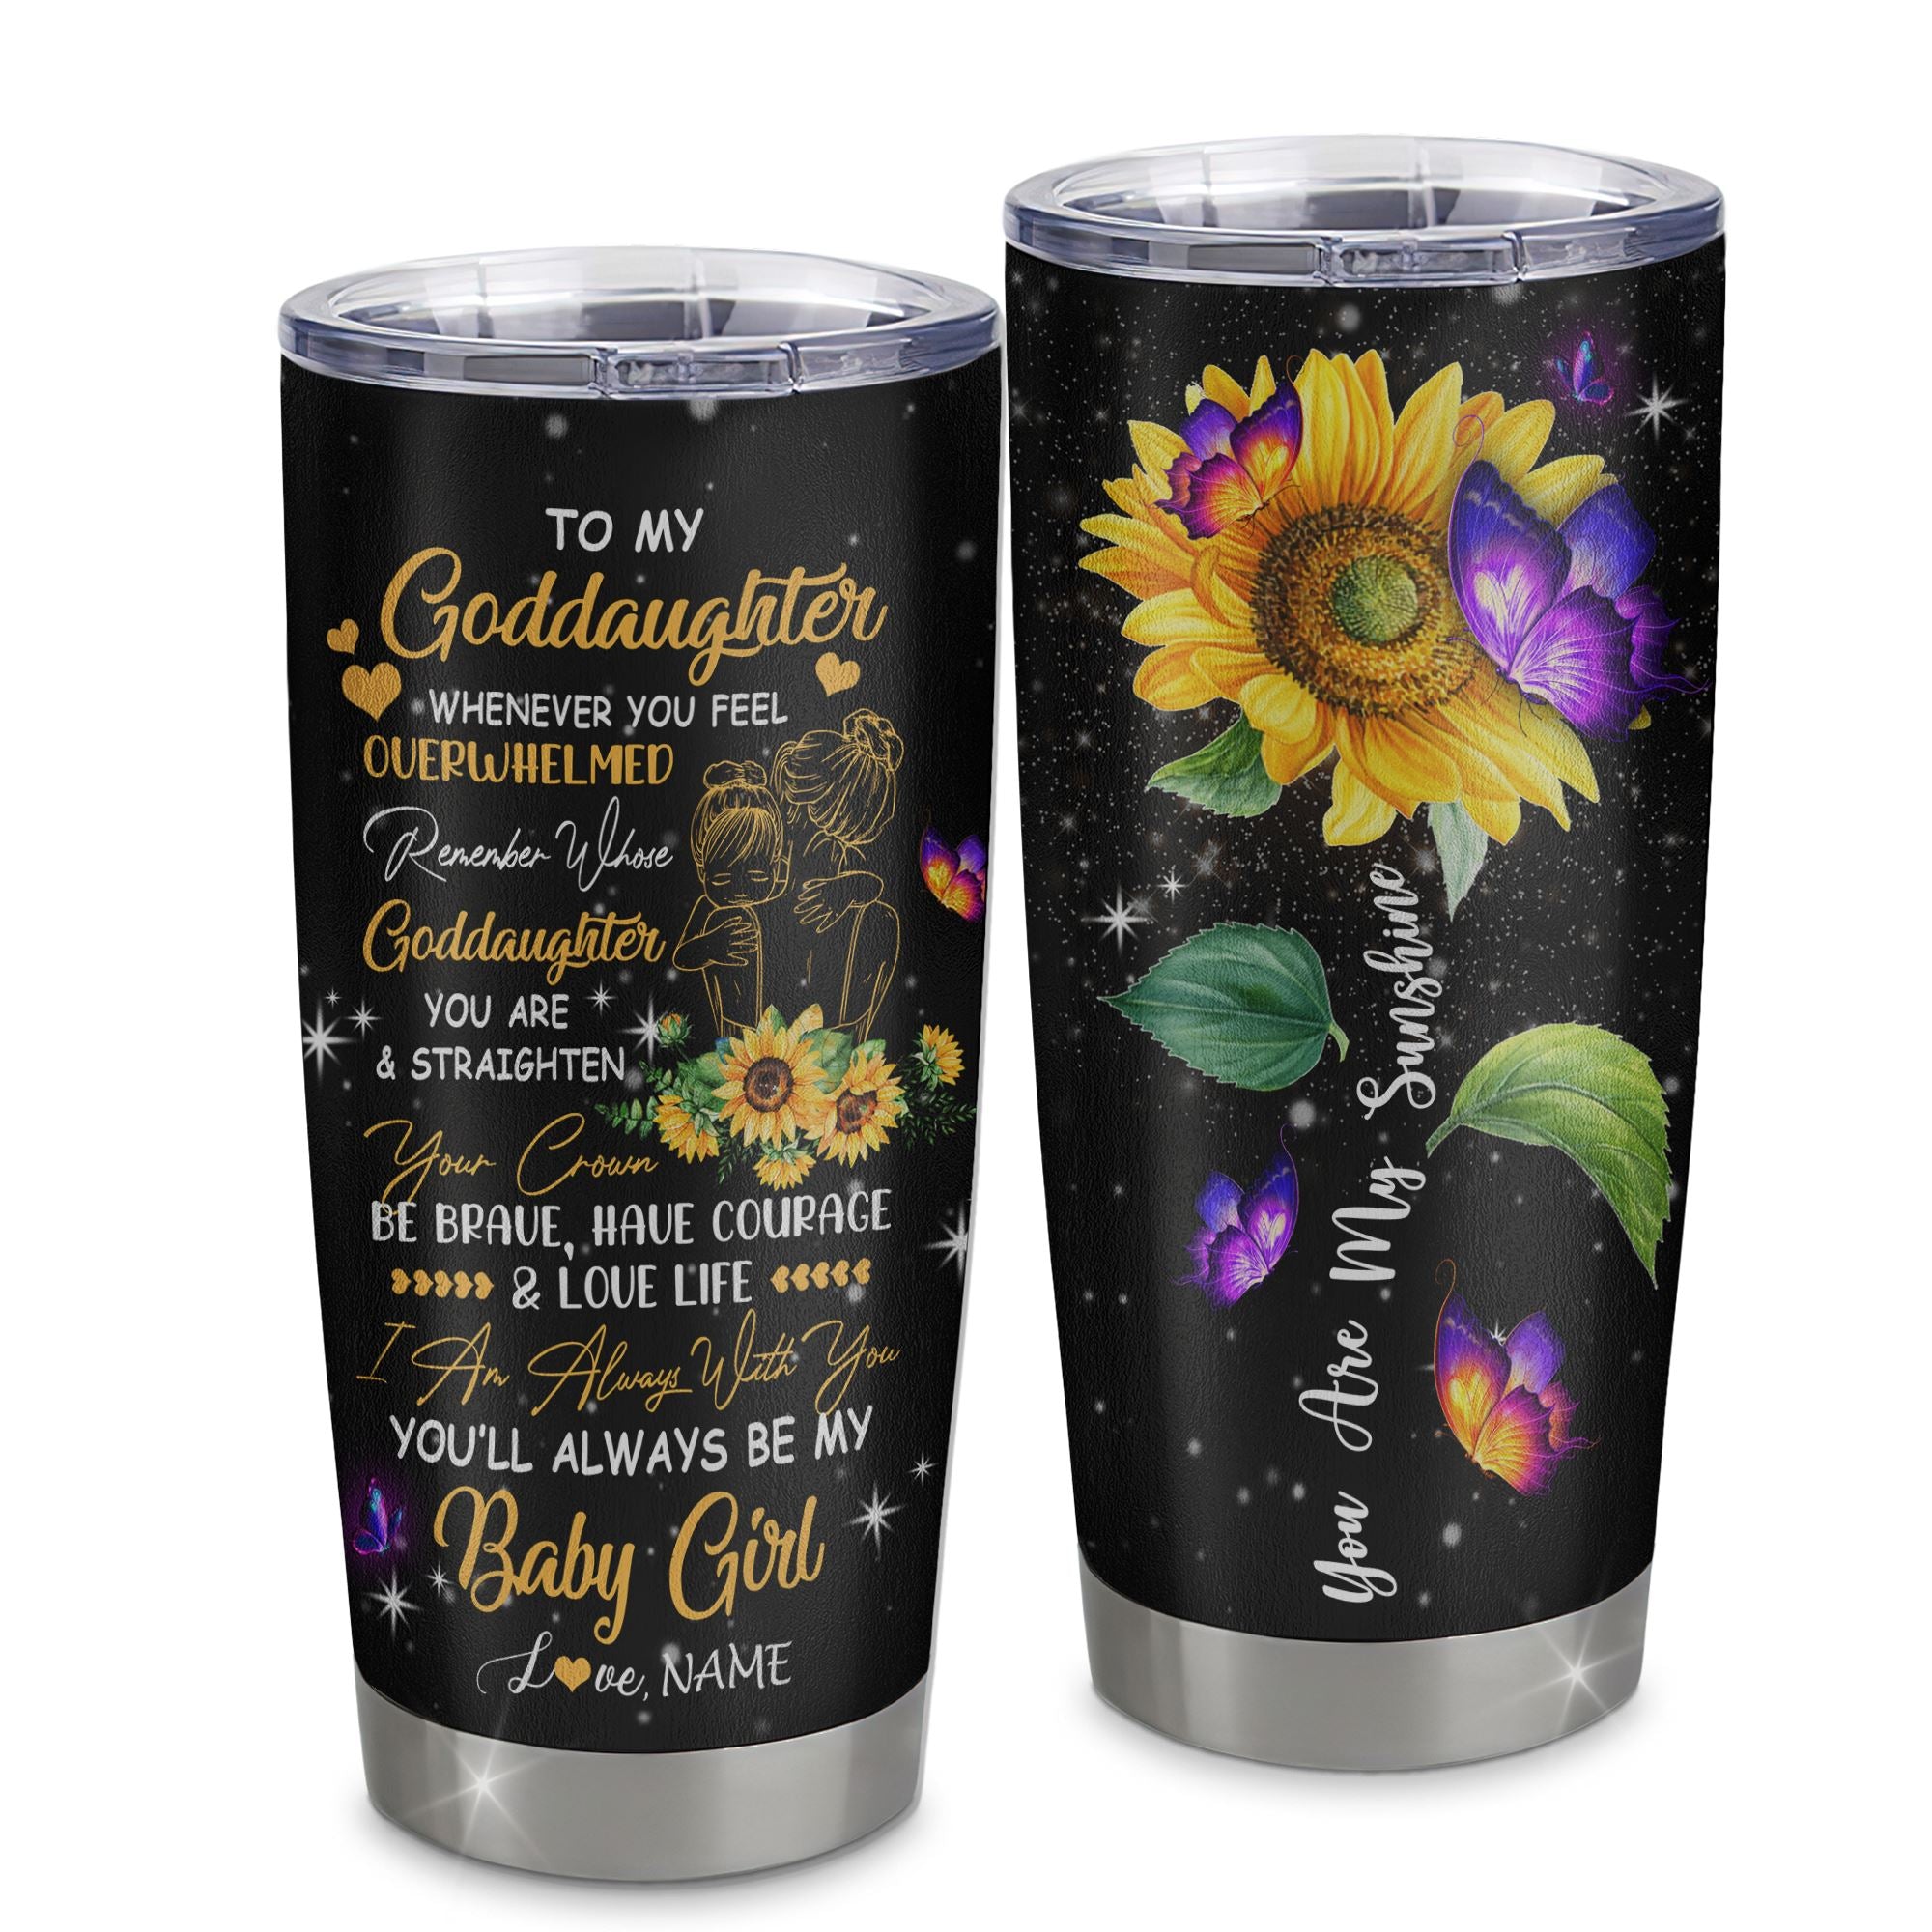 Personalized_To_My_Goddaughter_From_Aunt_Auntie_Stainless_Steel_Tumbler_Cup_You_Are_My_Sunshine_Sunflower_Butterfly_Goddaughter_Birthday_Graduation_Christmas_Travel_Mug_Tumbler_mockup-1.jpg